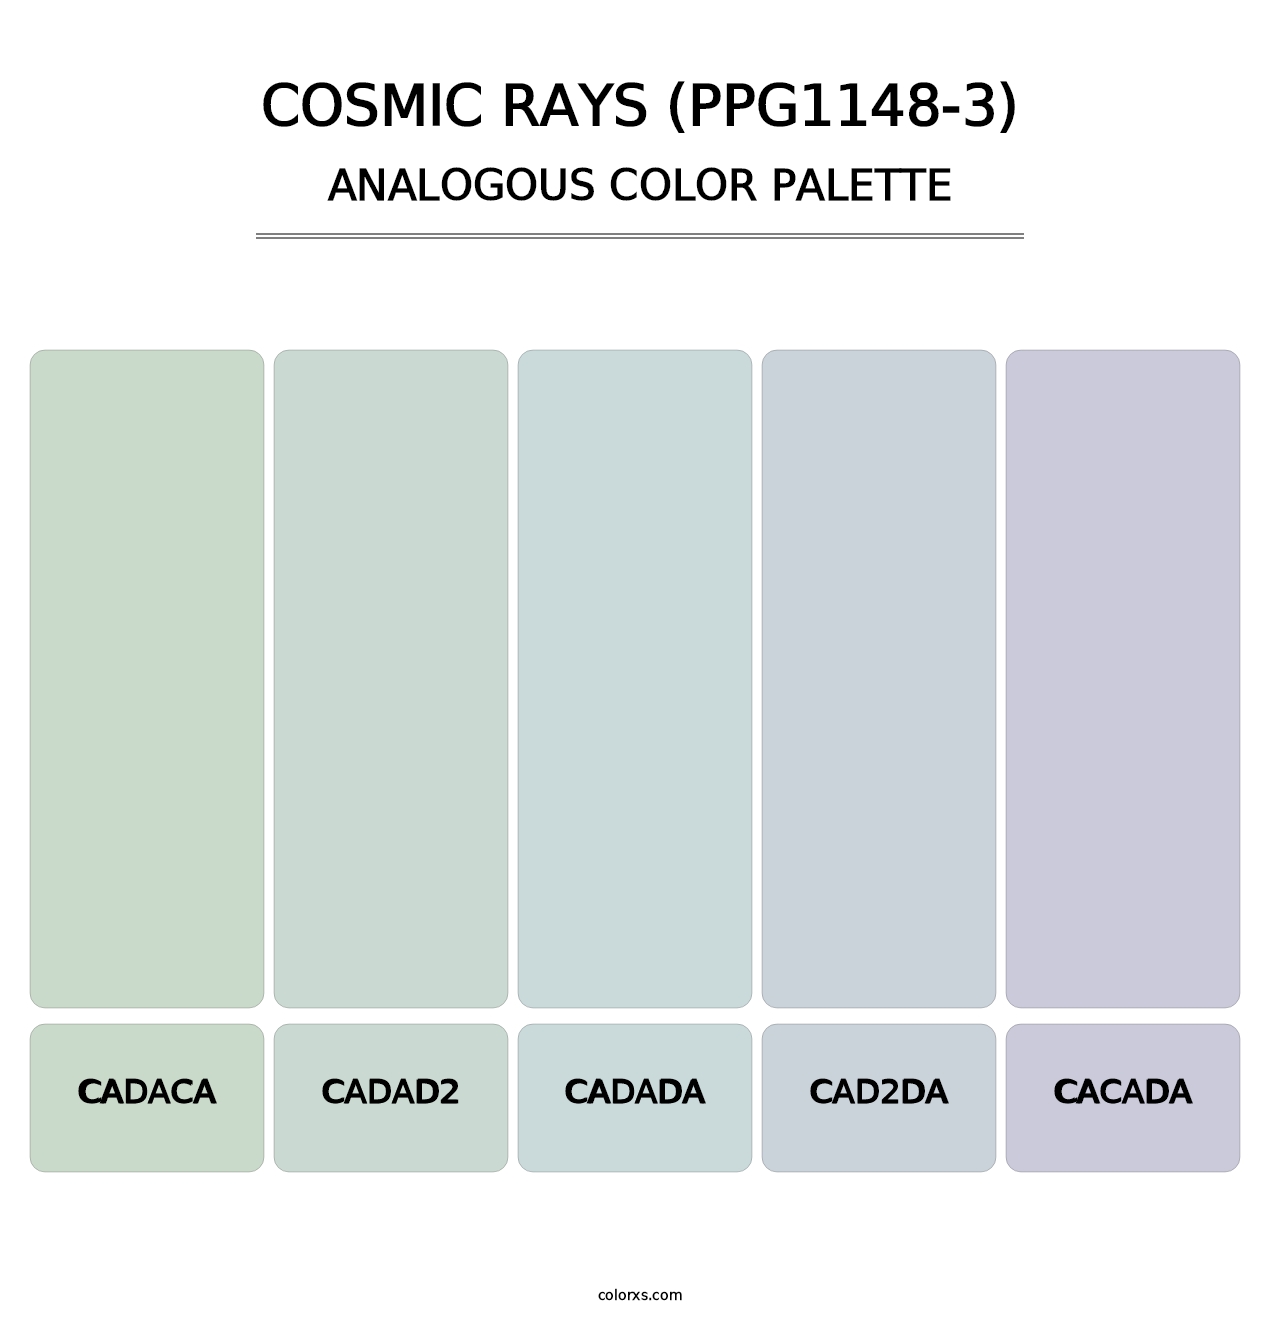 Cosmic Rays (PPG1148-3) - Analogous Color Palette